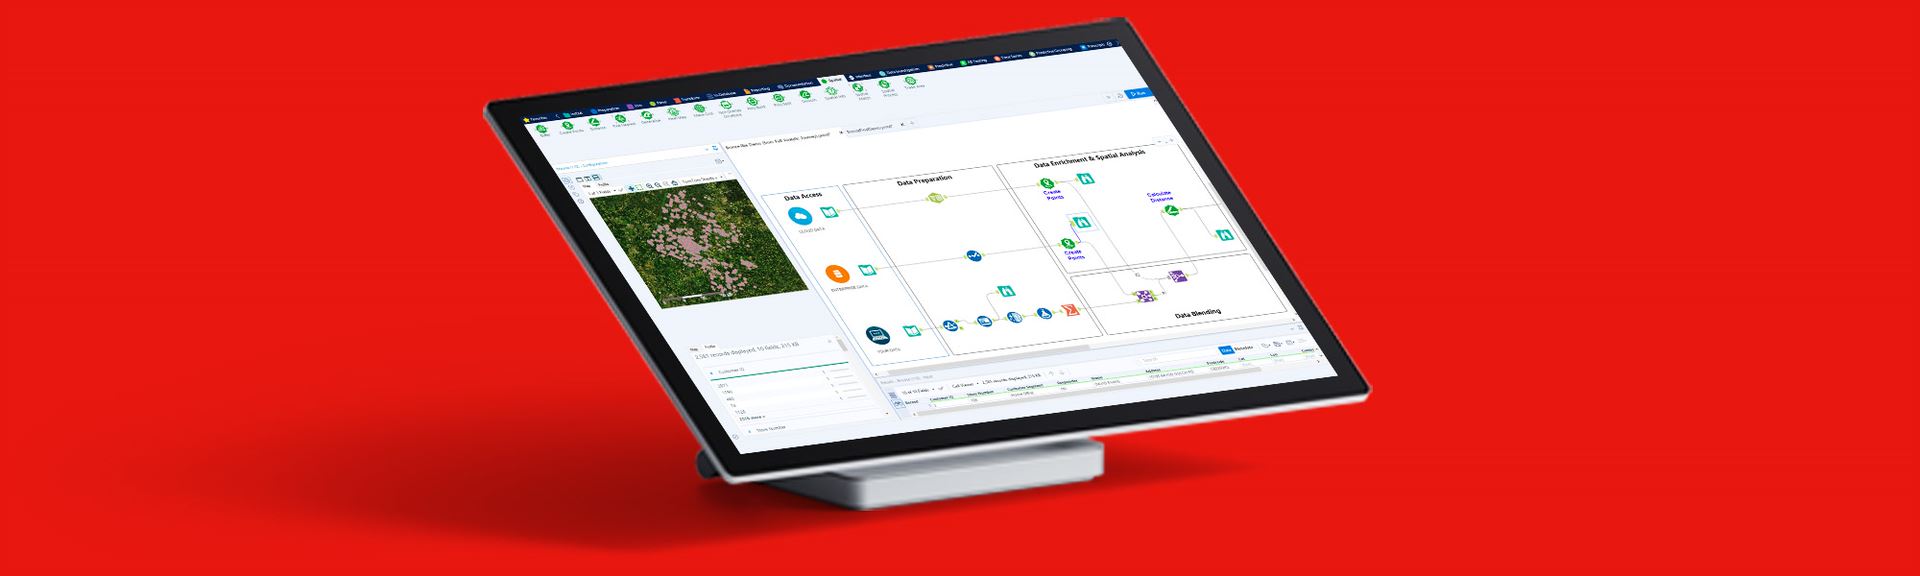 Site selection made easy with Alteryx and TomTom